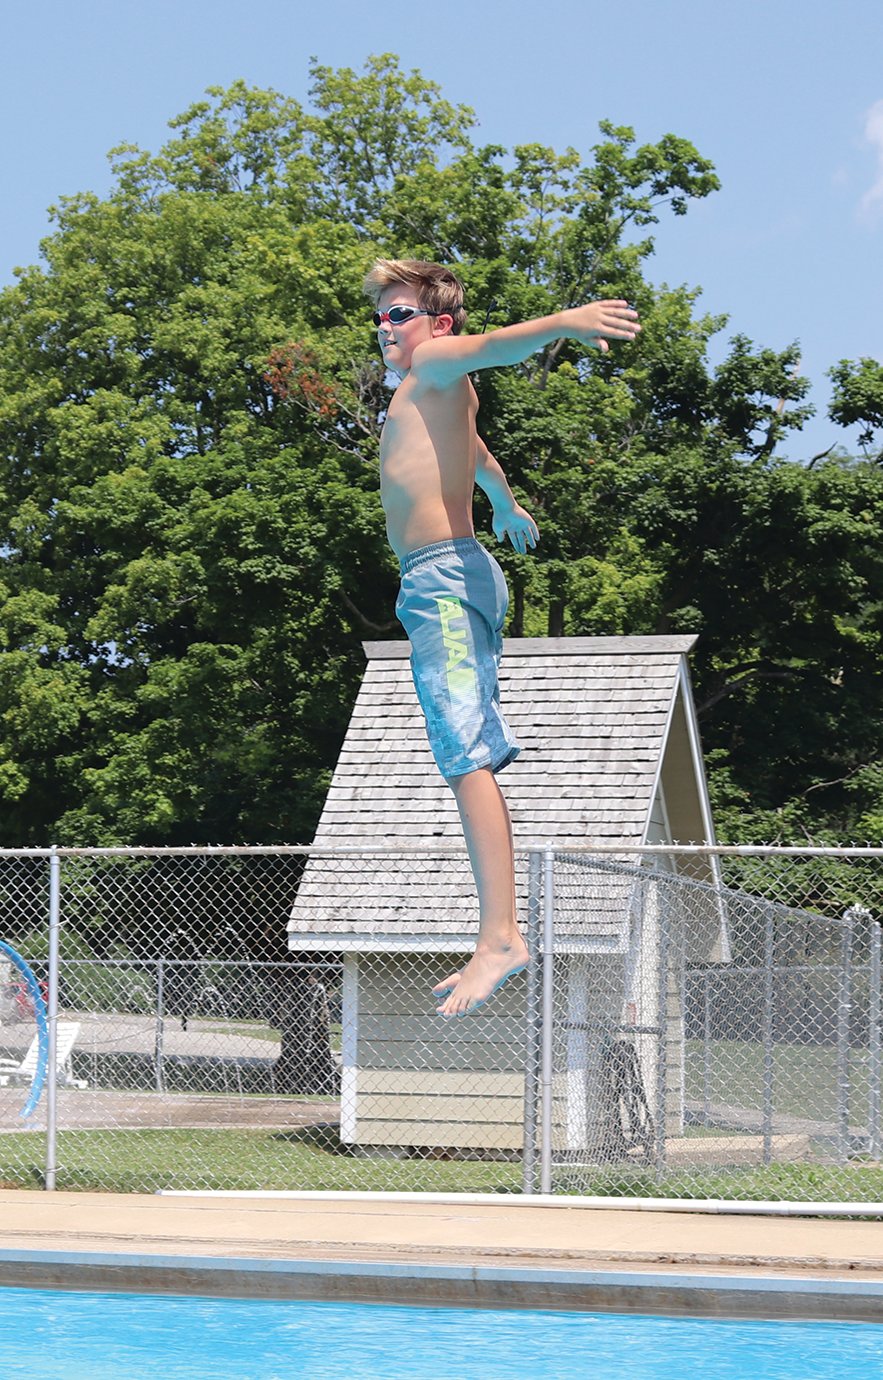 Shawn Ewoldt, 12, prepares for the "toothpick" reverse dive after bouncing off the Milligan Park Pool diving board on Thursday.